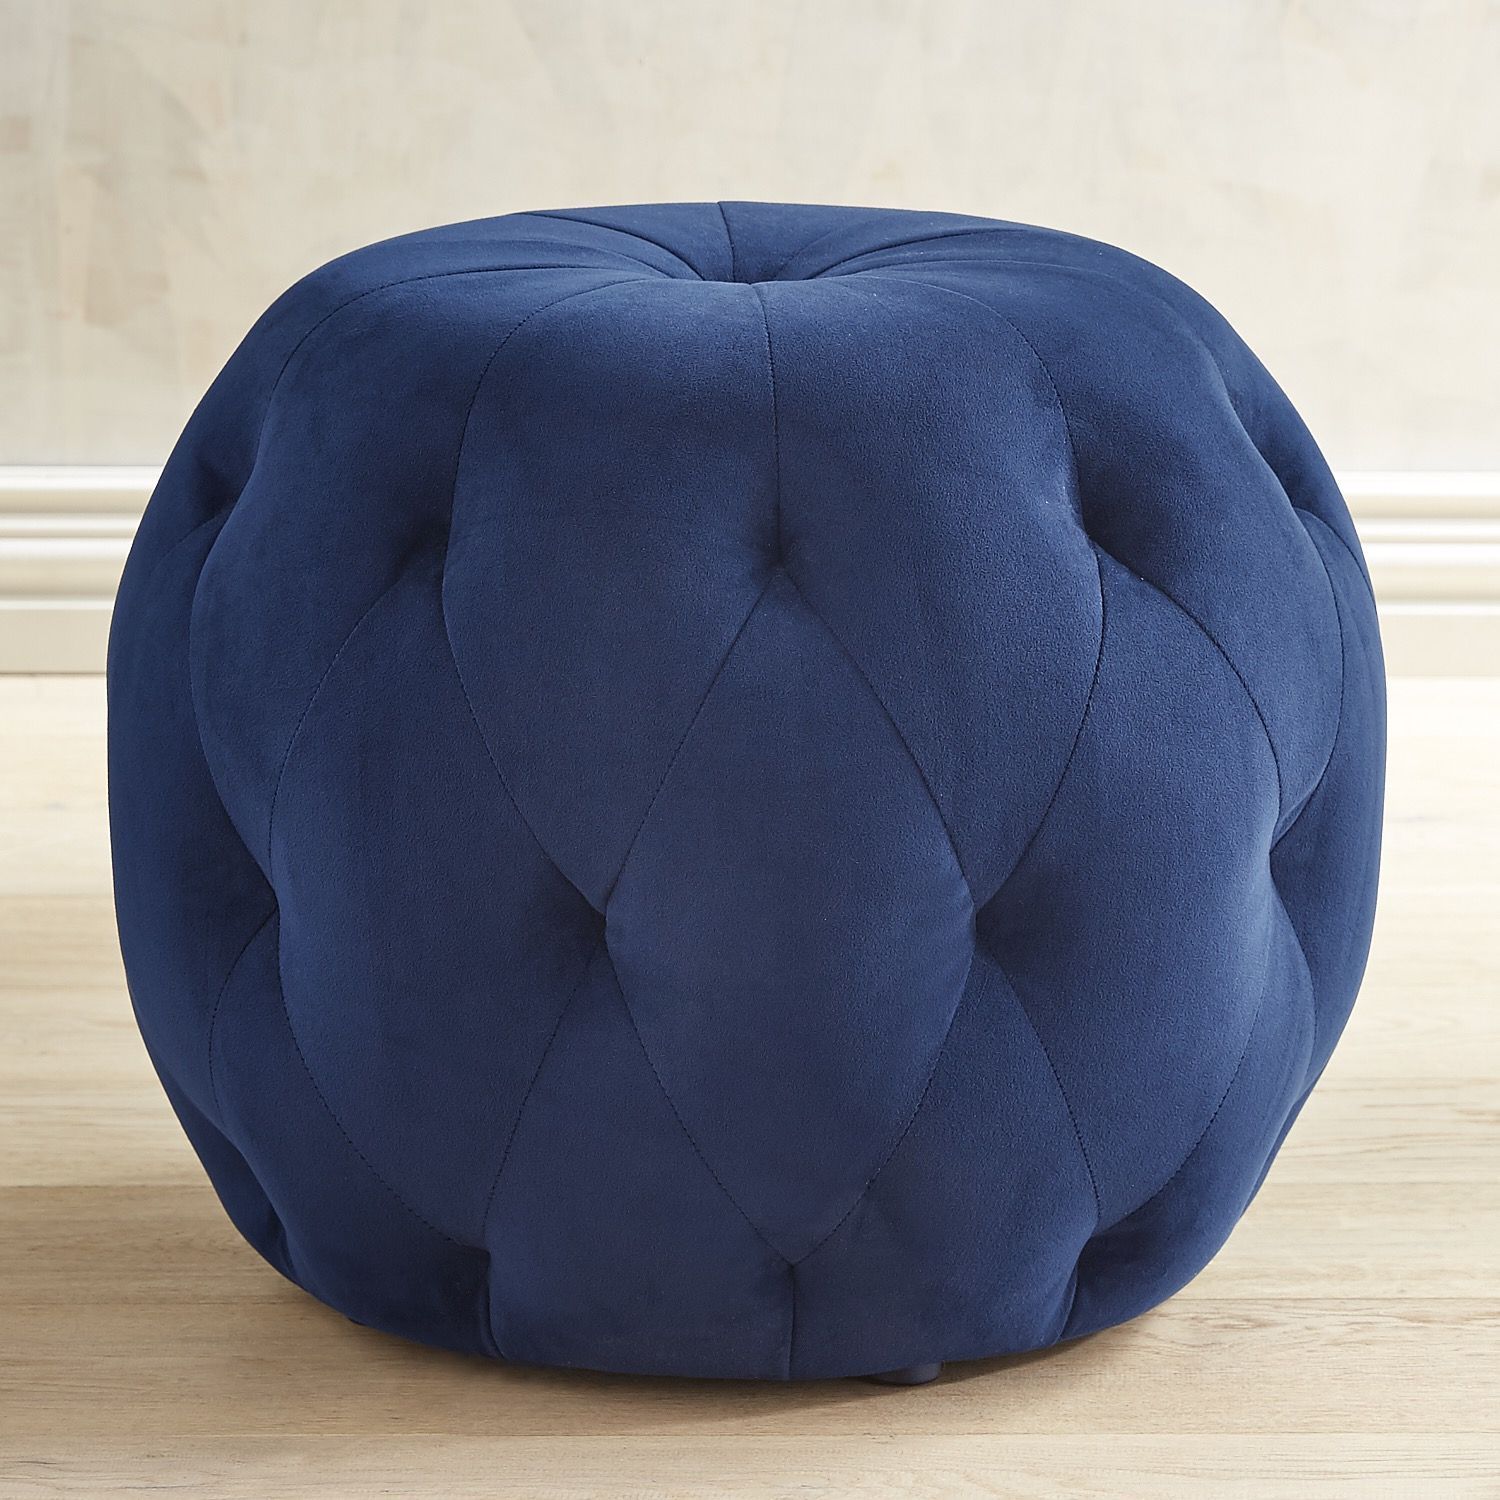 Ormand Navy Tufted Ottoman Blue | Tufted Ottoman, Blue Bedroom With Regard To Navy And Light Gray Woven Pouf Ottomans (Gallery 19 of 20)